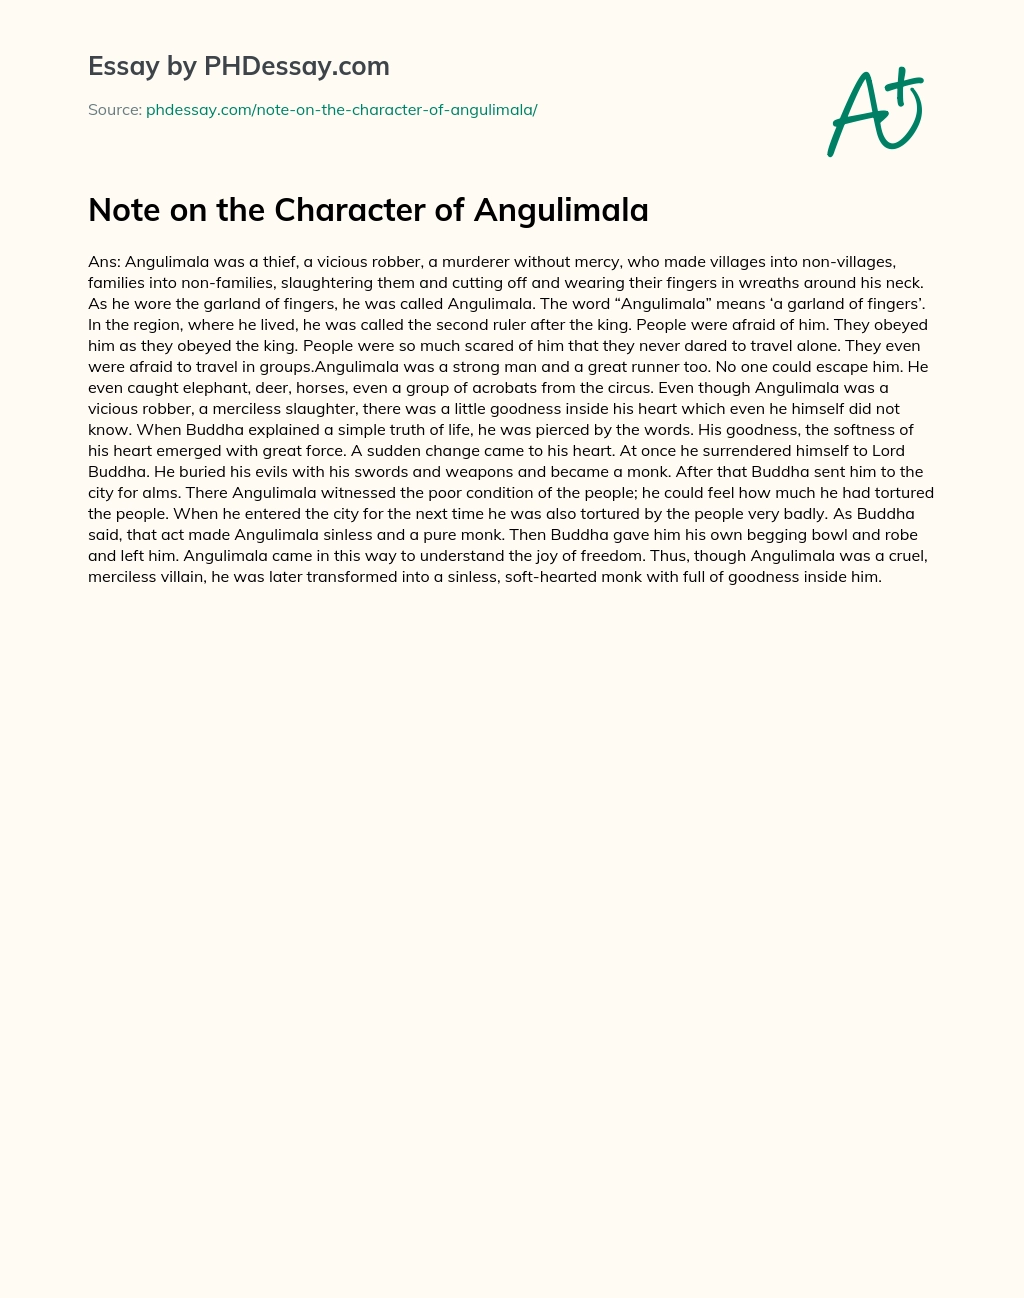 Note on the Character of Angulimala essay